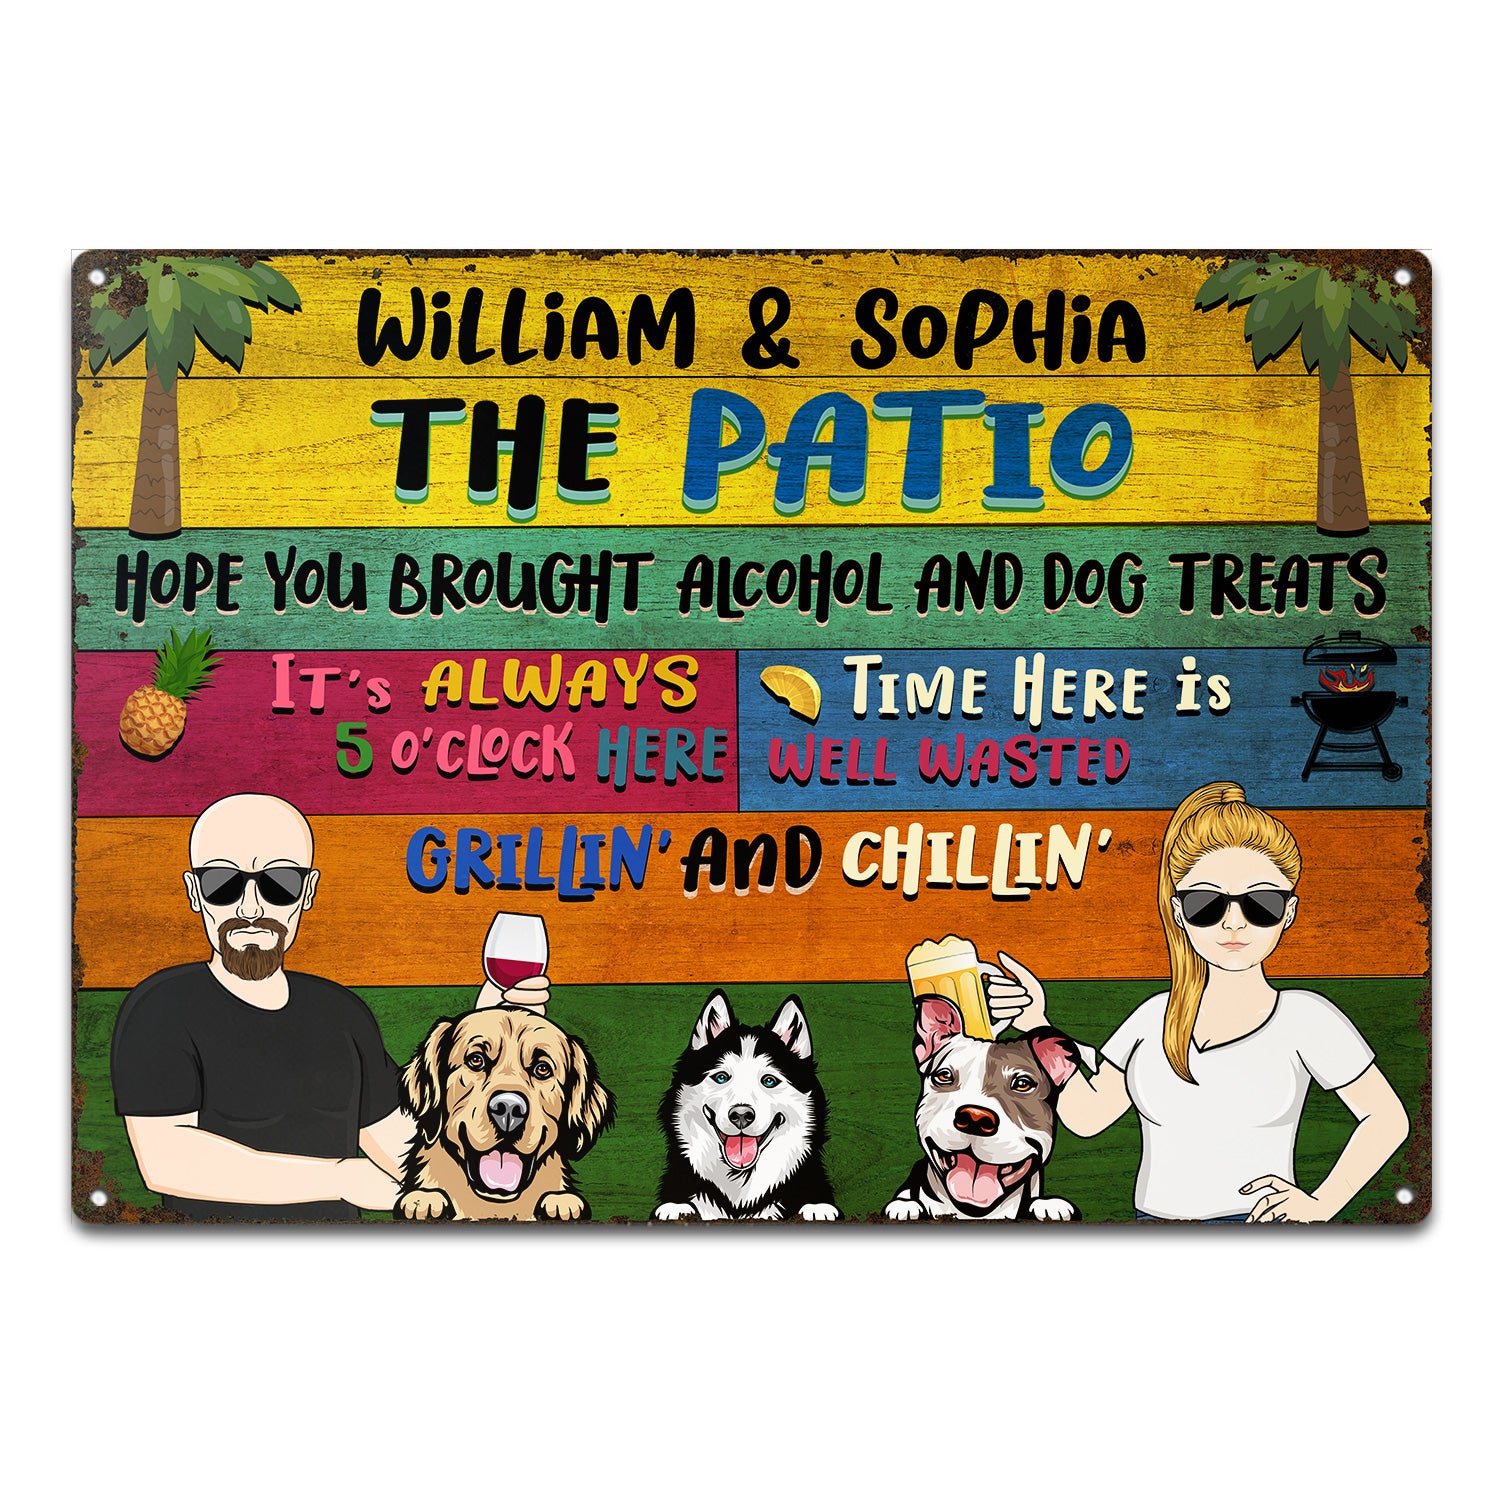 Patio Grilling Chilling Hope You Brought Alcohol Couple Single - Home Decor, Backyard Decor, Gift For Her, Him, Family, Dog Lovers - Personalized Custom Classic Metal Signs